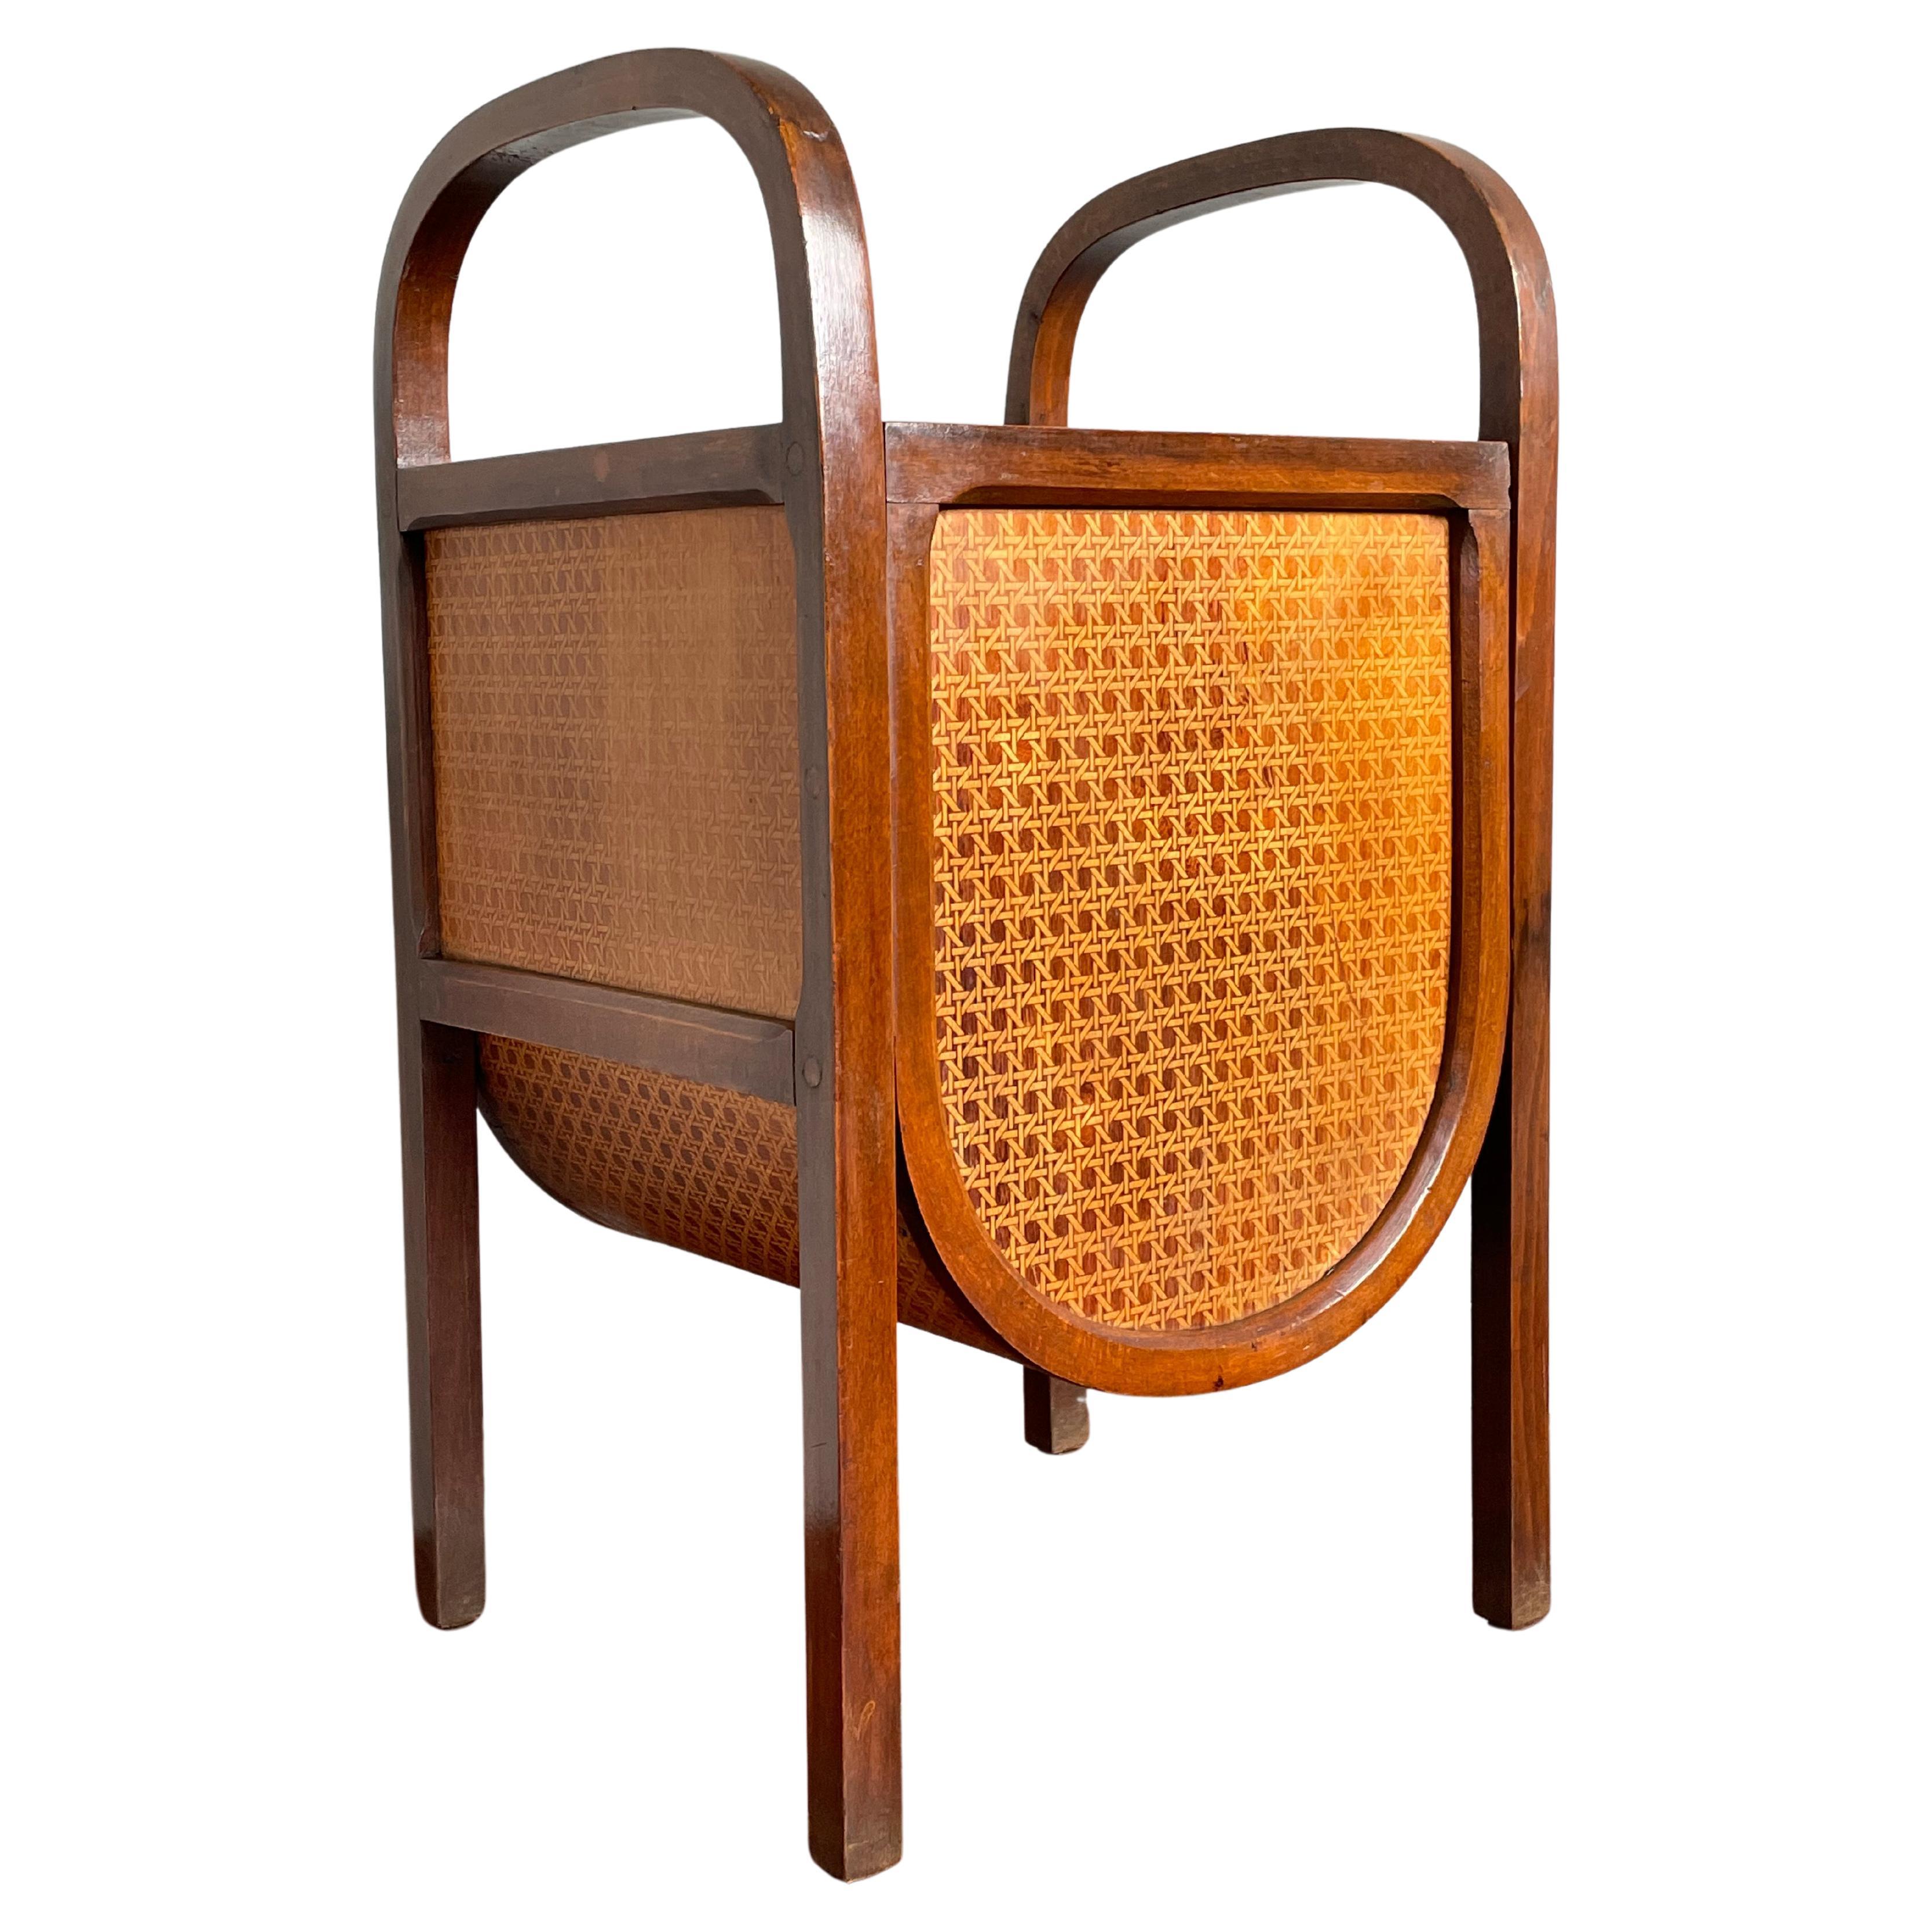 Stunning and Rare Design, Early 20th Century Bentwood Modernist Magazine Stand For Sale